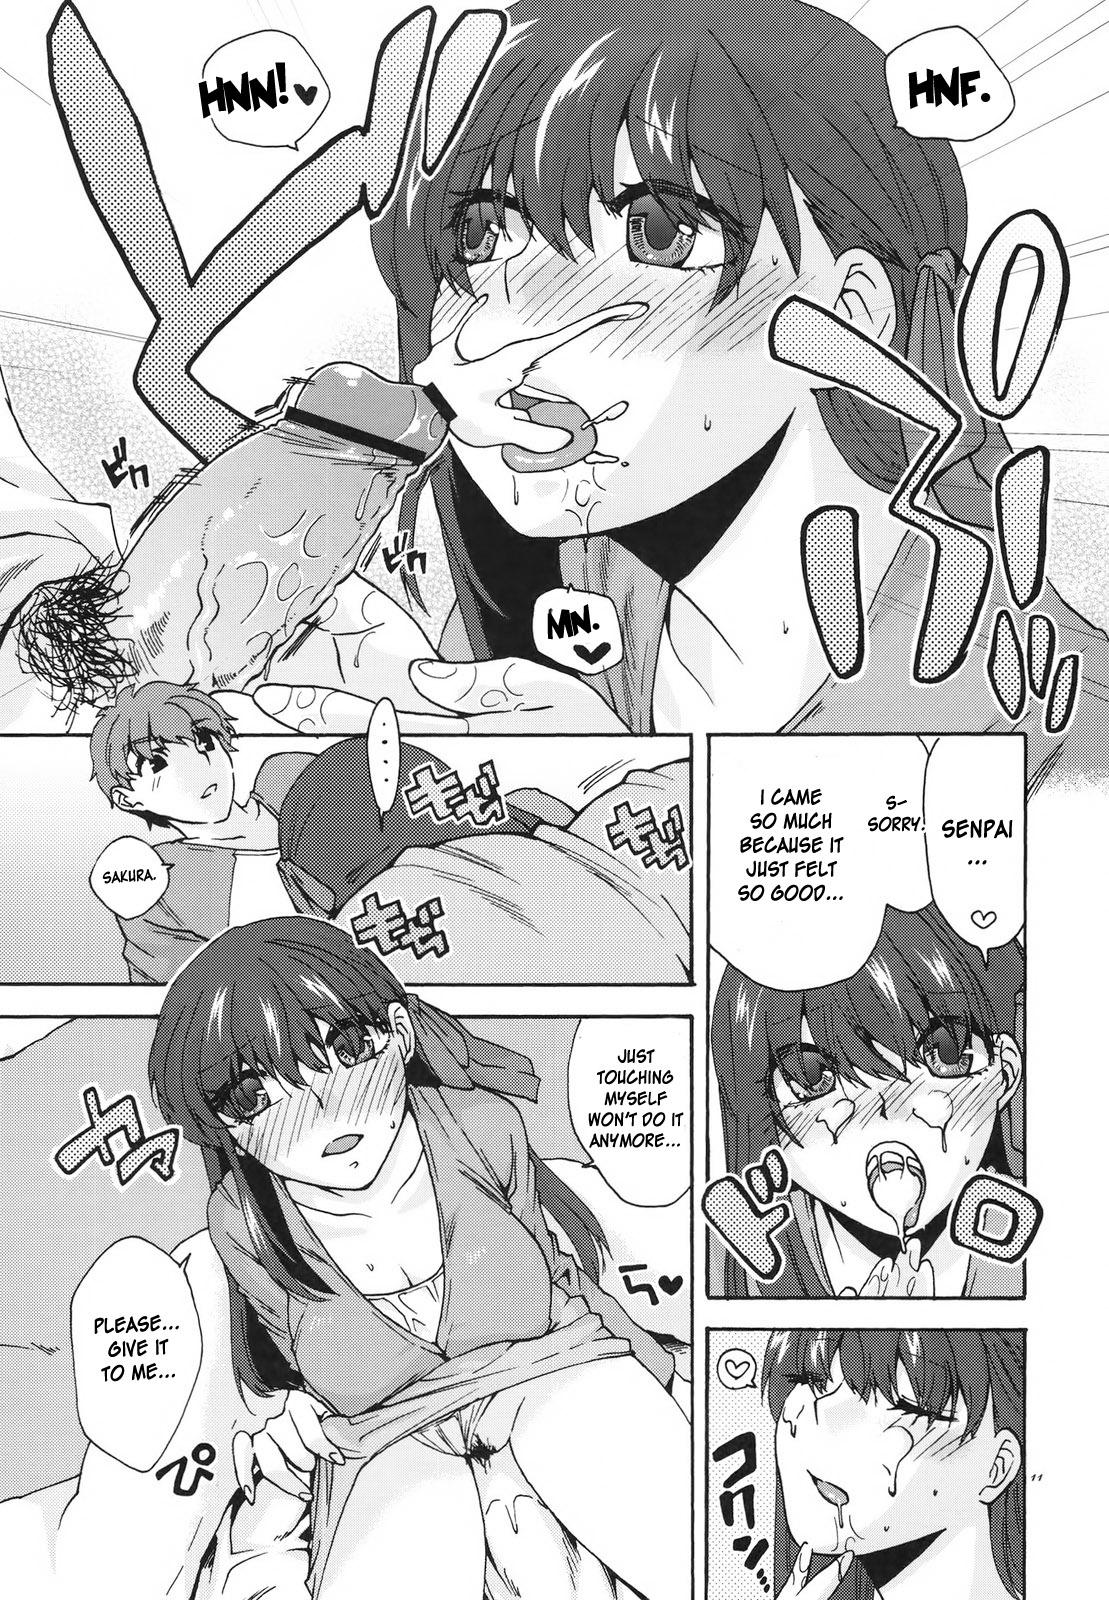 Ruiva Crime and Affection - Fate stay night Adorable - Page 11